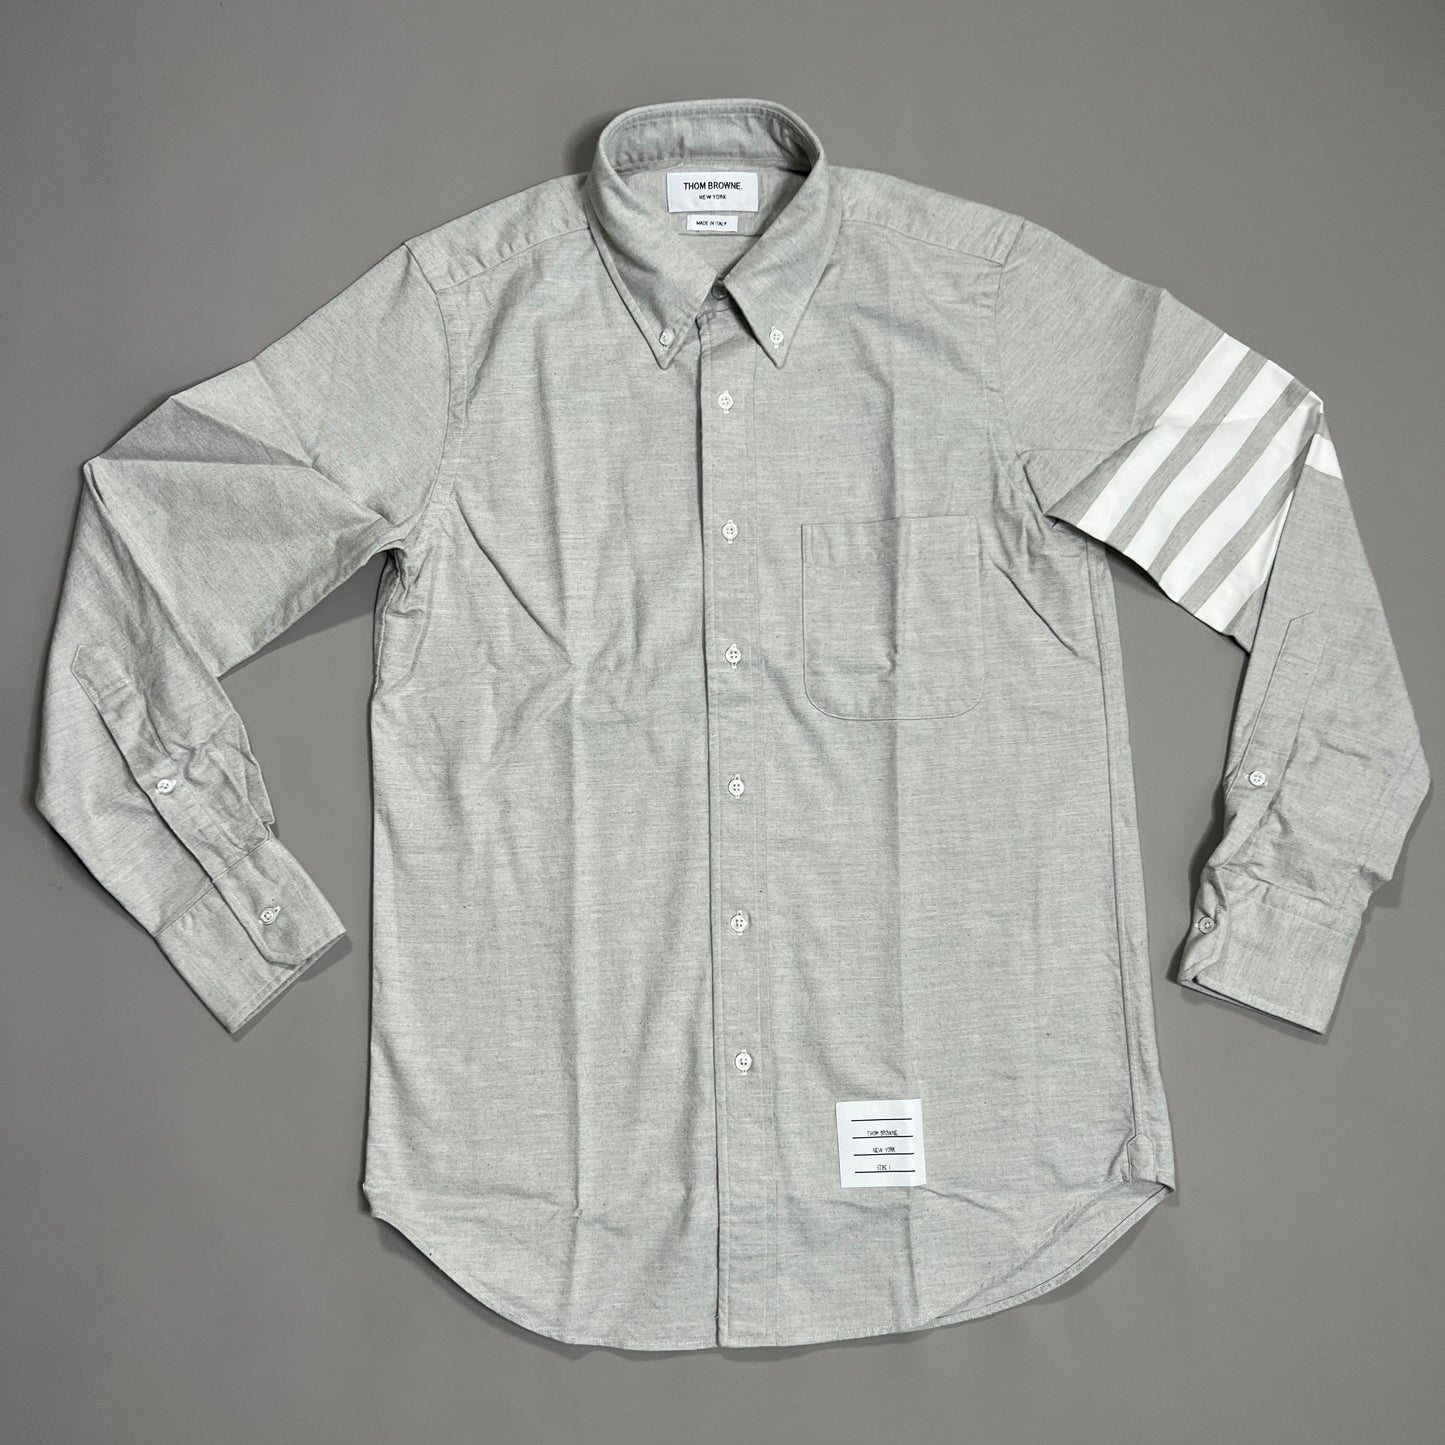 THOM BROWNE Straight Fit Button-Down Long Sleeve w/CB RWB Flannel shirt w/woven 4 Bar Sleeve in Med Grey Size 1 (NEW)